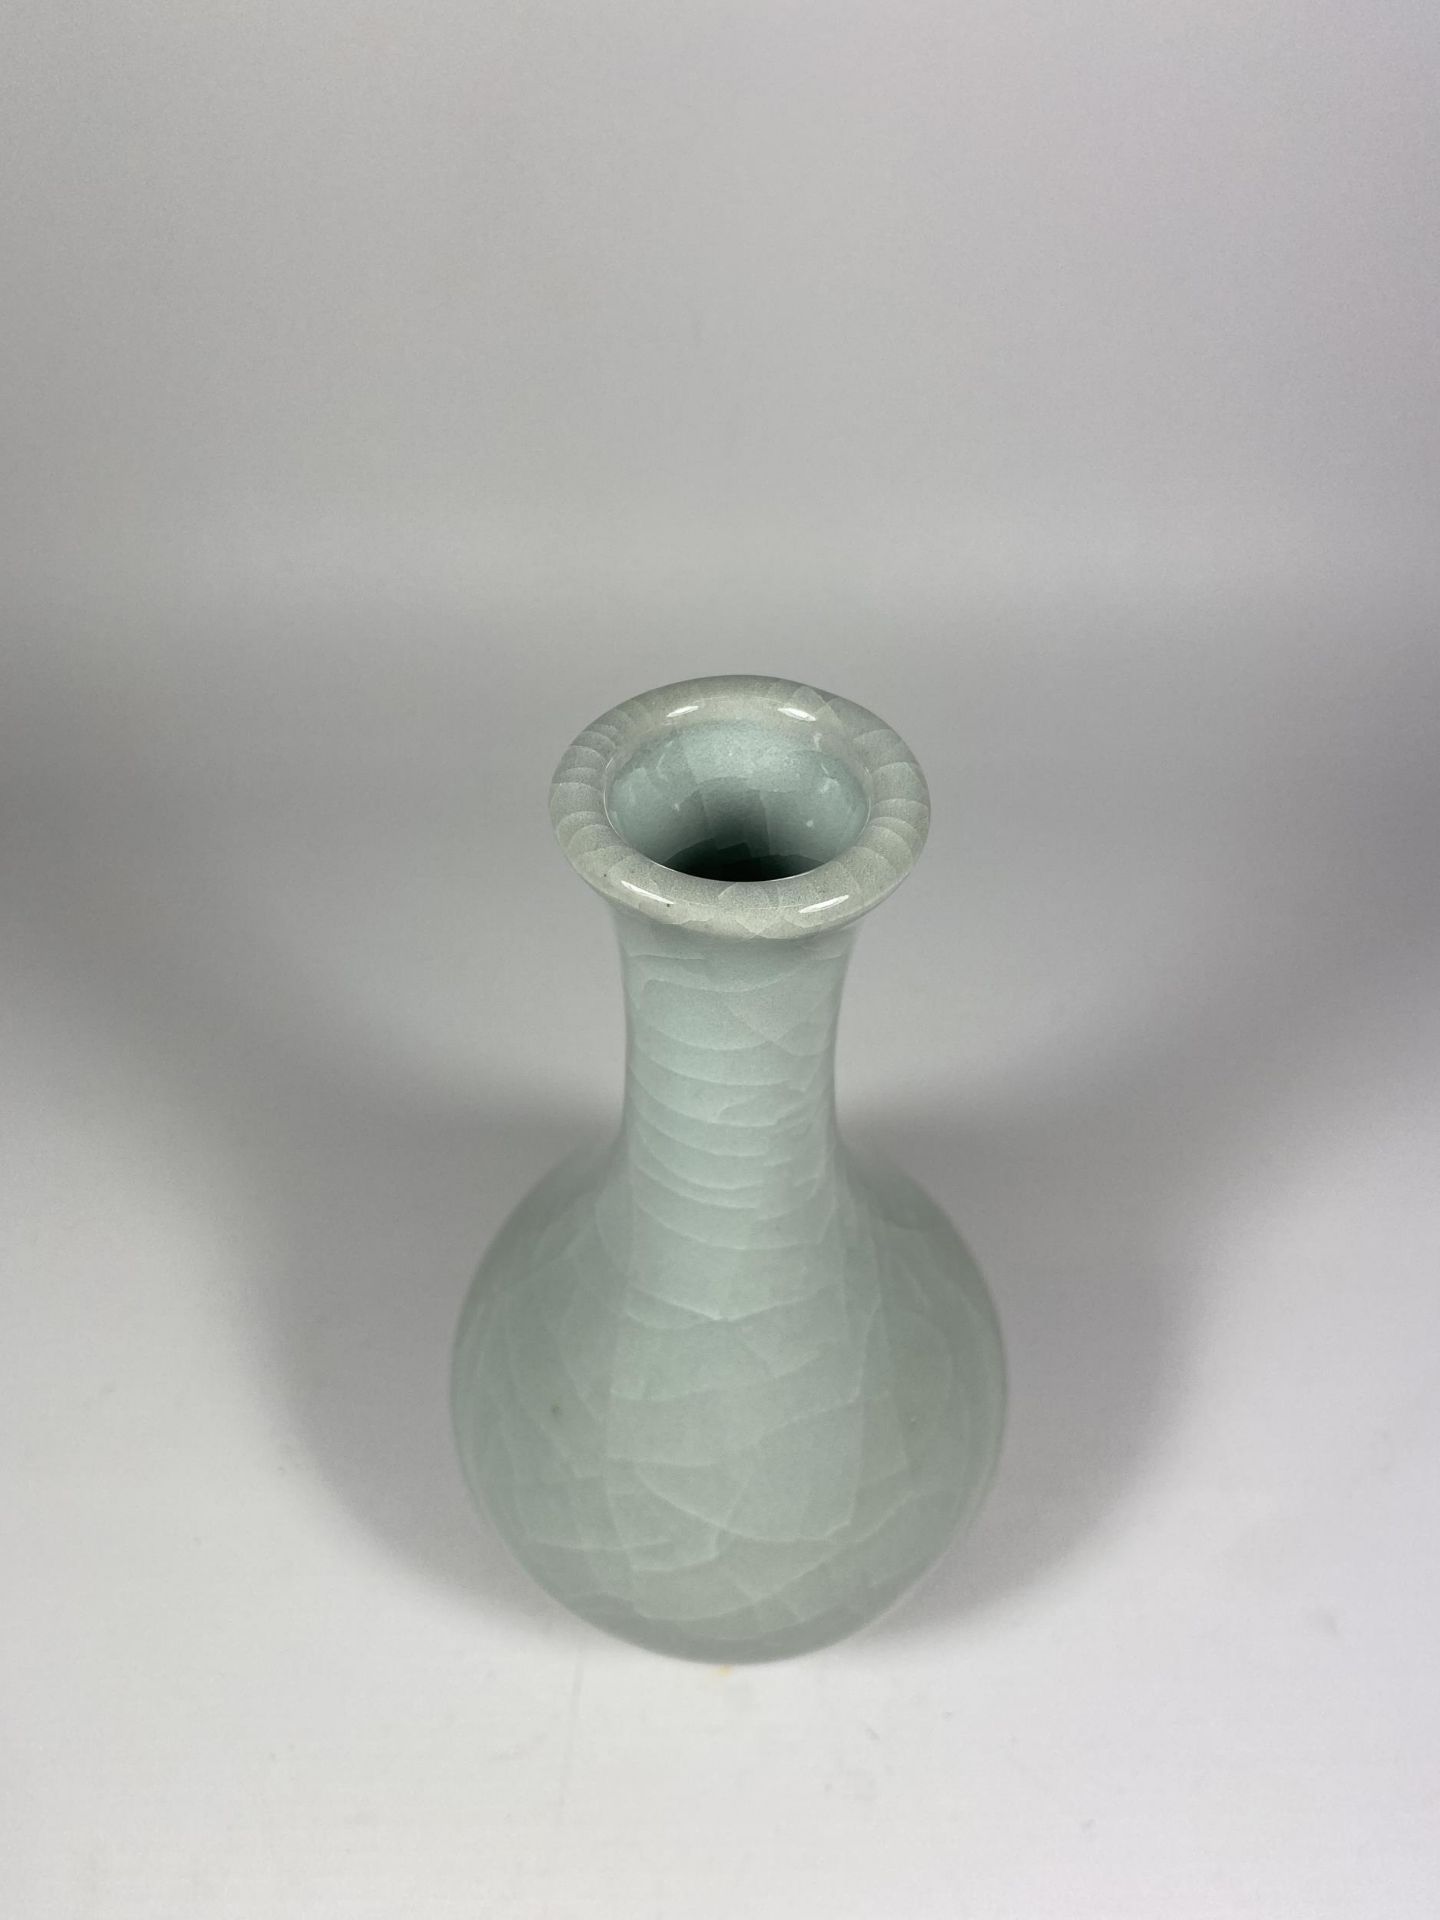 A CHINESE CELADON GROUND PORCELAIN BOTTLE VASE ON CARVED WOODEN STAND, HEIGHT OF VASE 18CM - Image 3 of 6